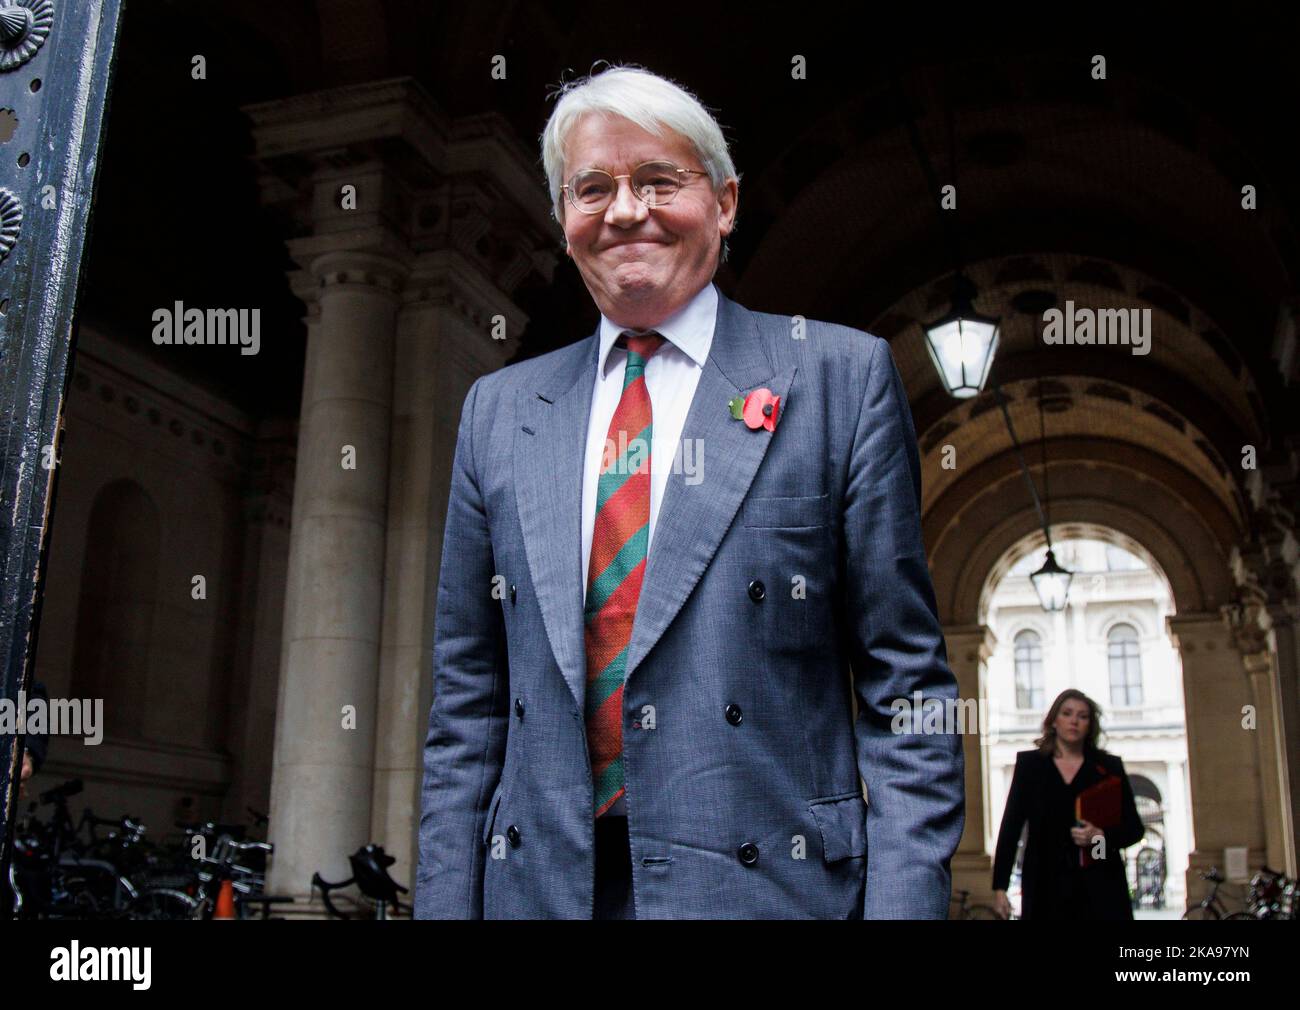 London, UK. 1st Nov, 2022. Andrew Mitchell, Minister of State for Development, at Downing Street for a Cabinet meeting. Credit: Karl Black/Alamy Live News Stock Photo